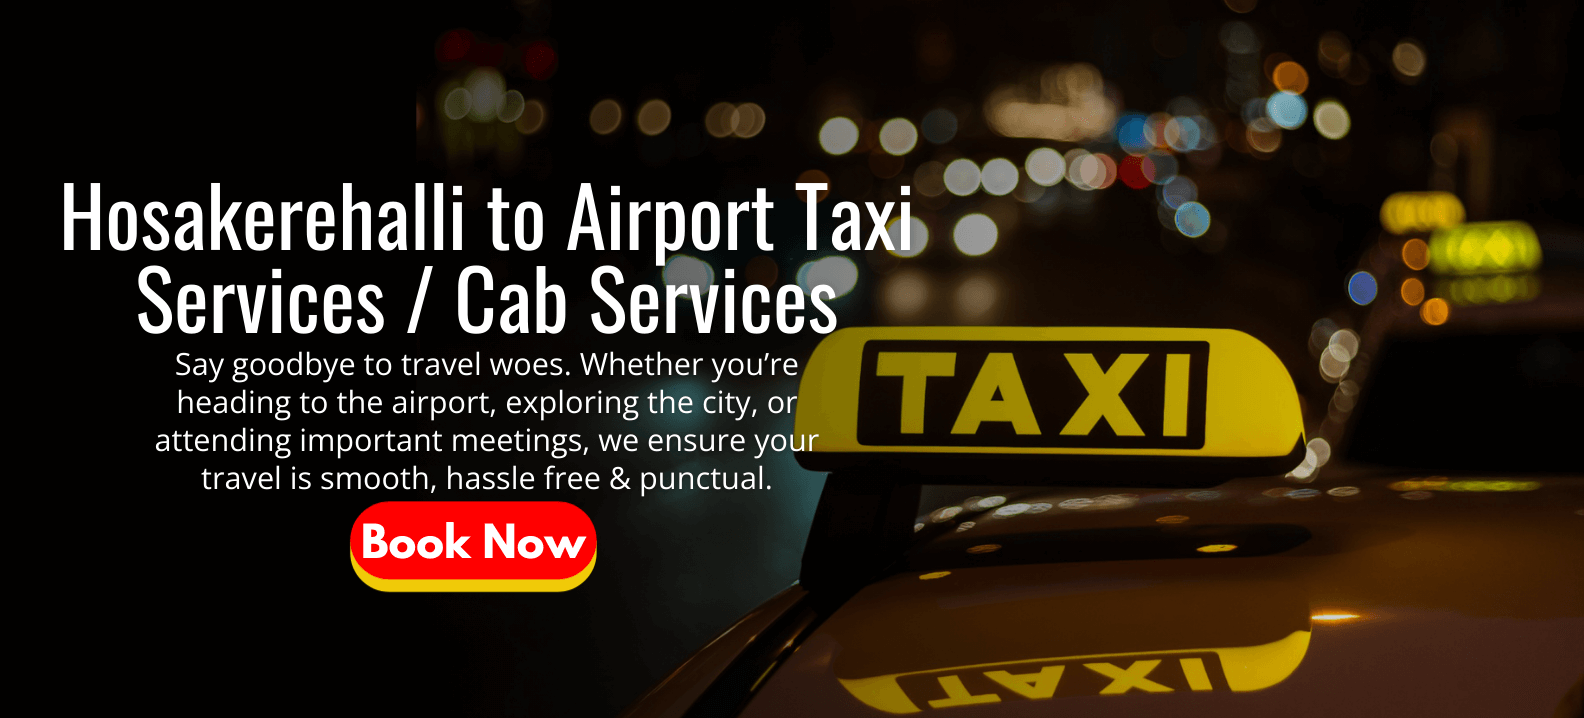 Hosakerehalli to Airport Taxi Services Cab Services